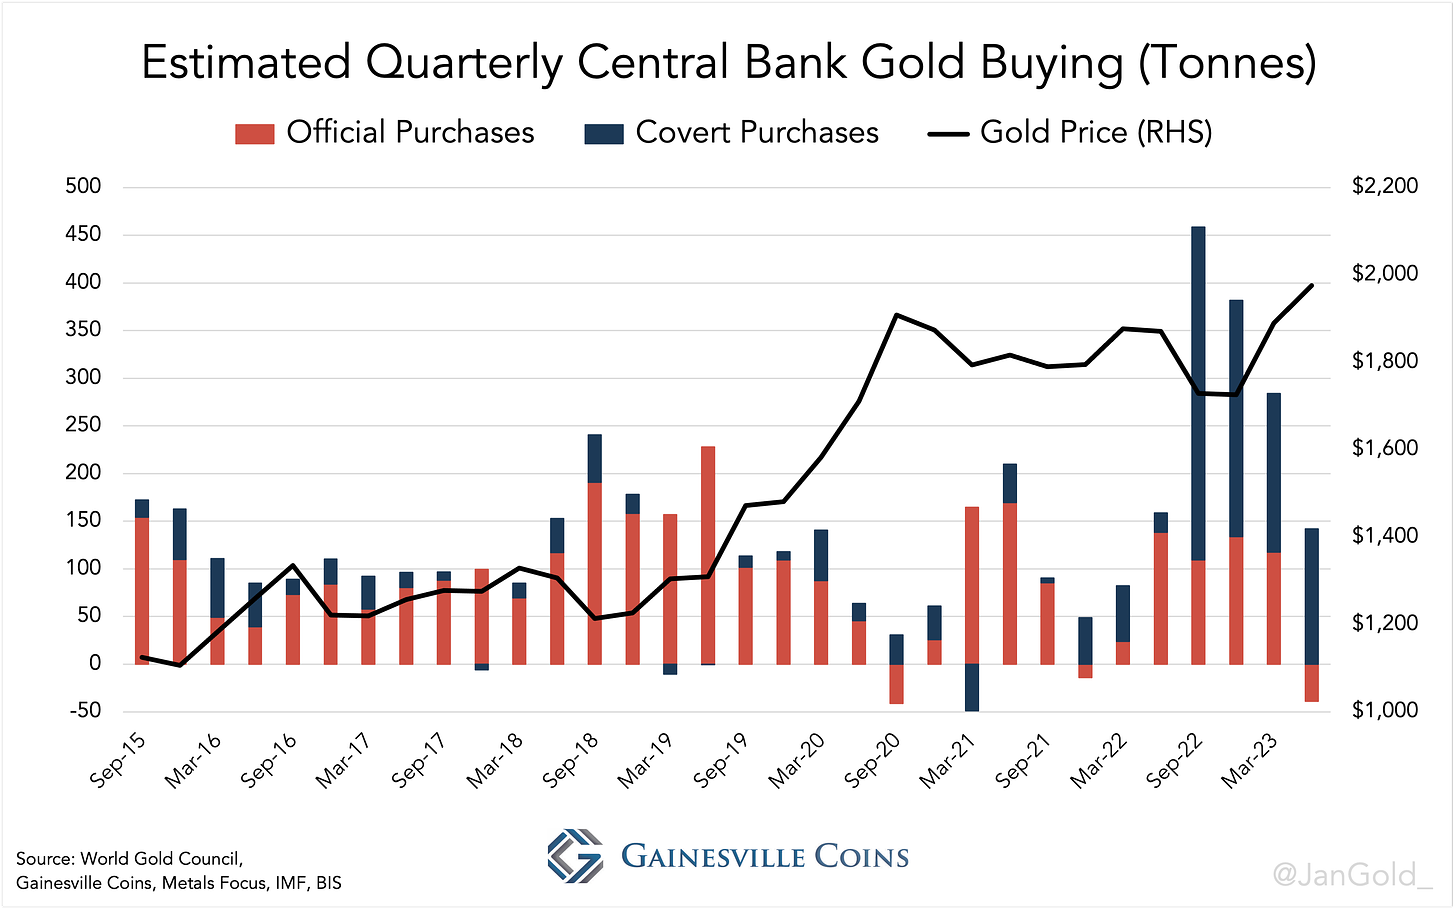 chart showing estimated quarterly central bank gold buying